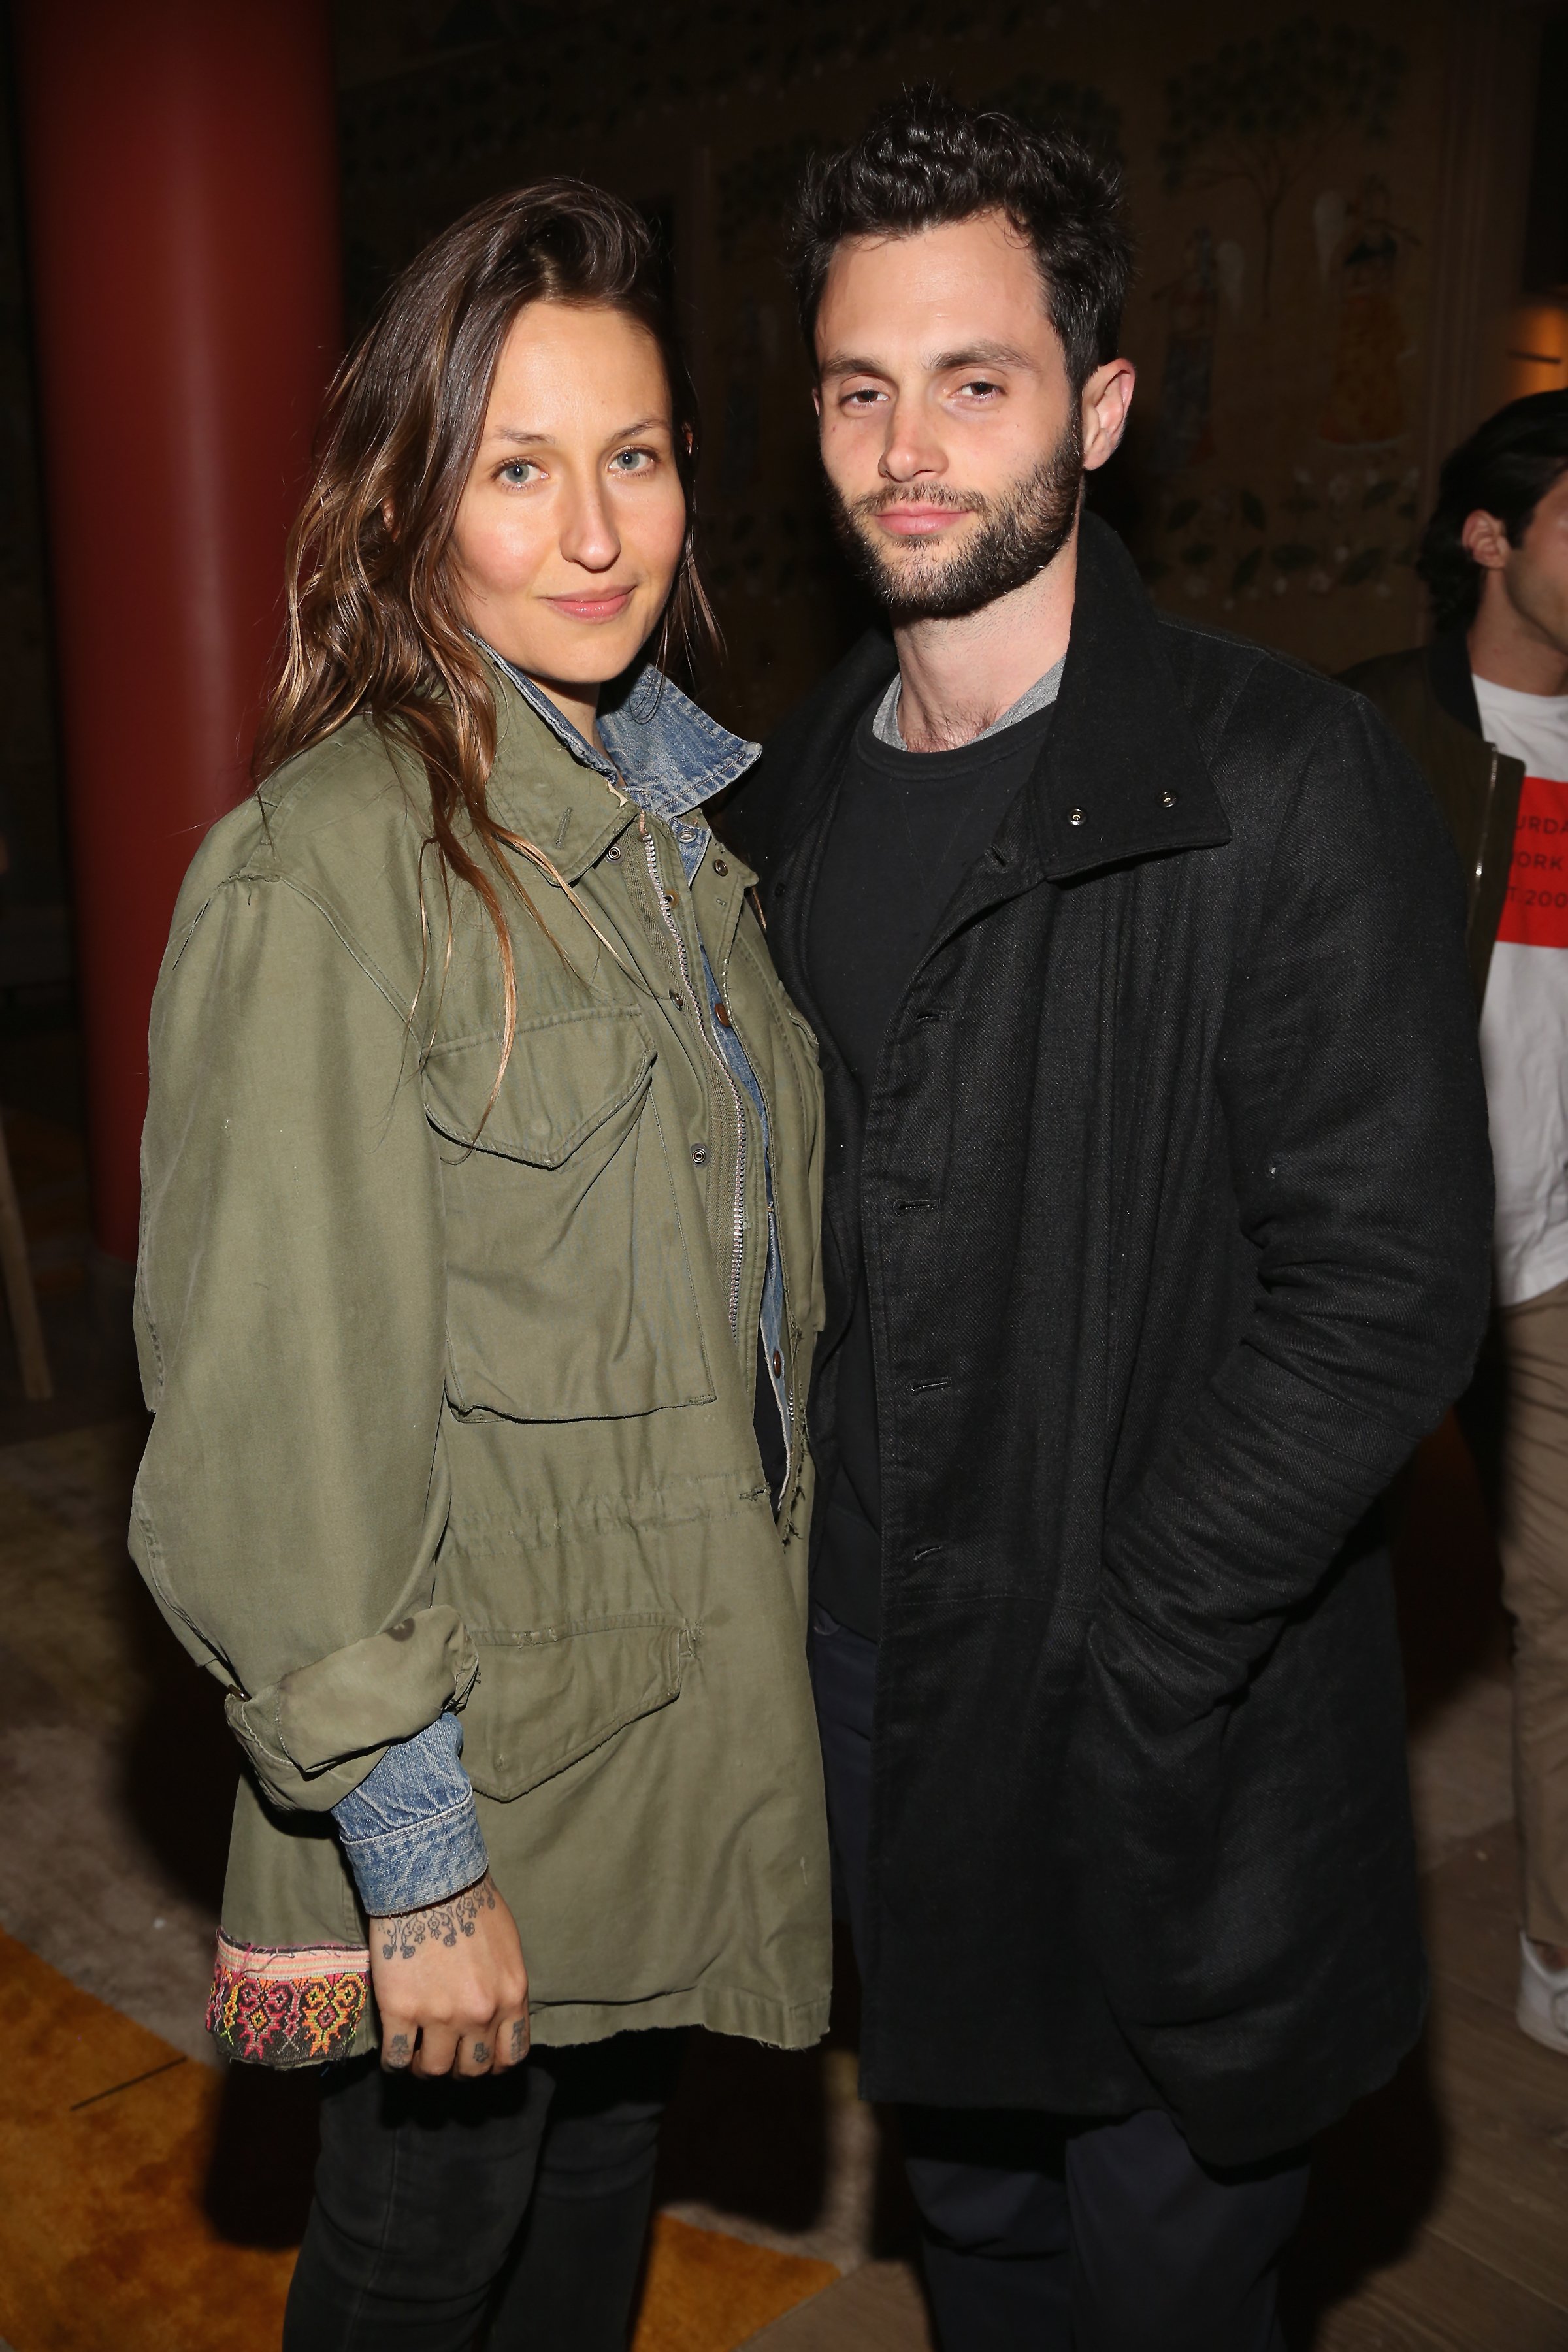 Domino Kirke and Penn Badgley attend The Weinstein Company and Lyft host a special screening of "3 Generations" on April 30, 2017, in New York City. | Source: Getty Images